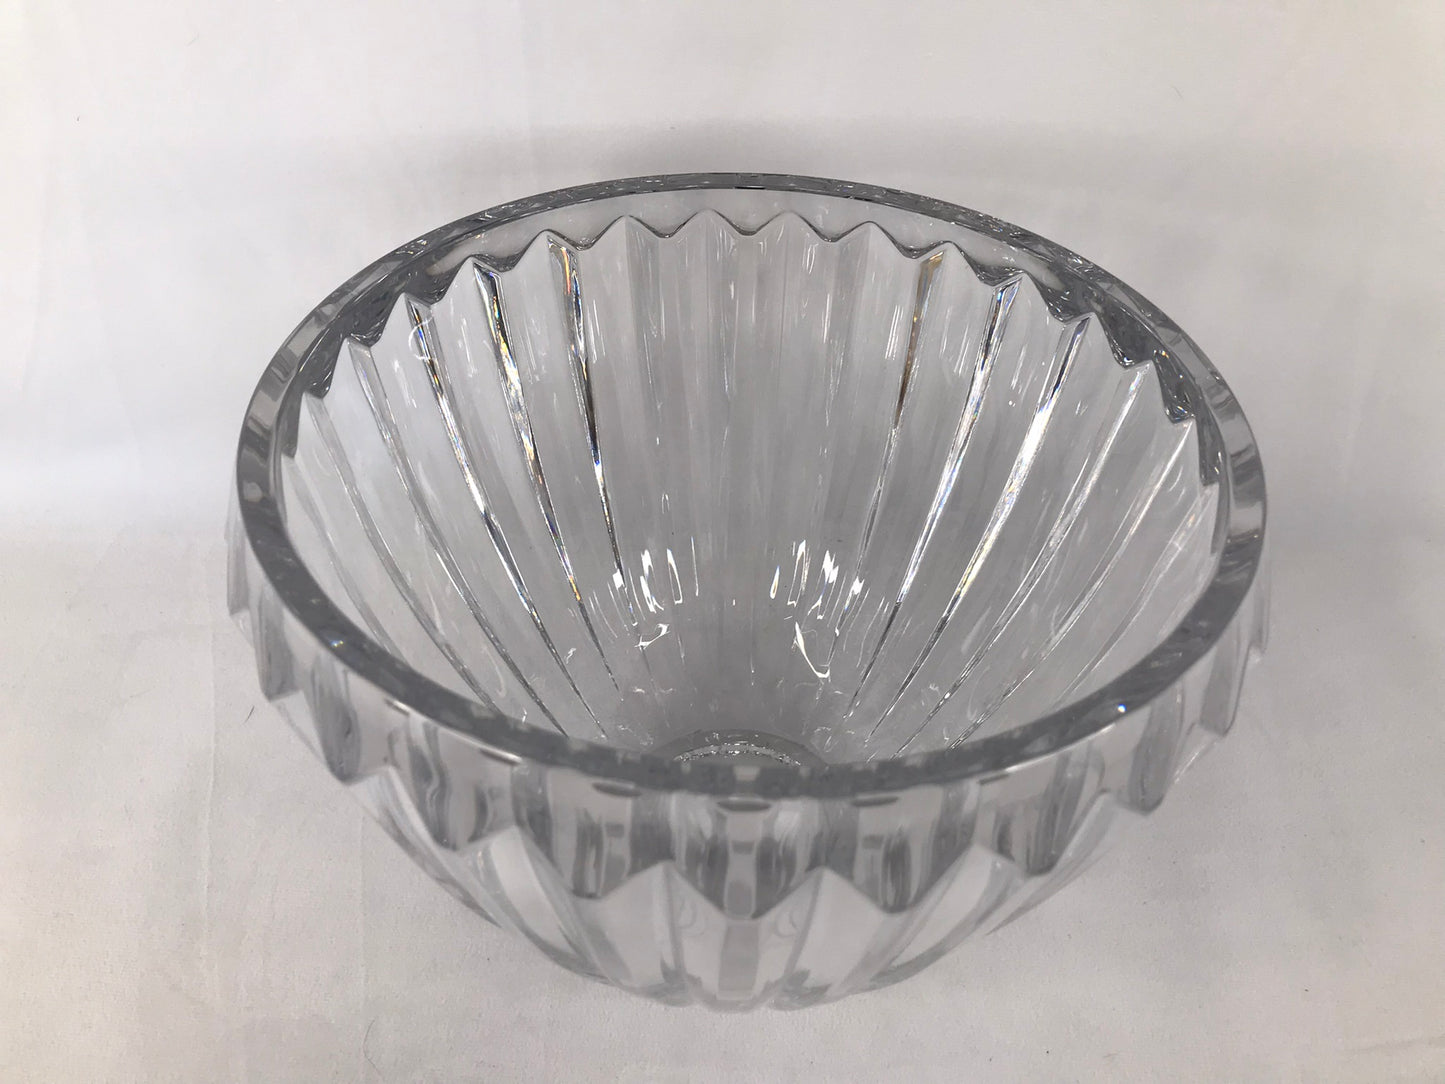 Home and Cottage Large Cut Glass Crystal Bowl Thick and Heavy 9 x 8 inch NEW Perfect